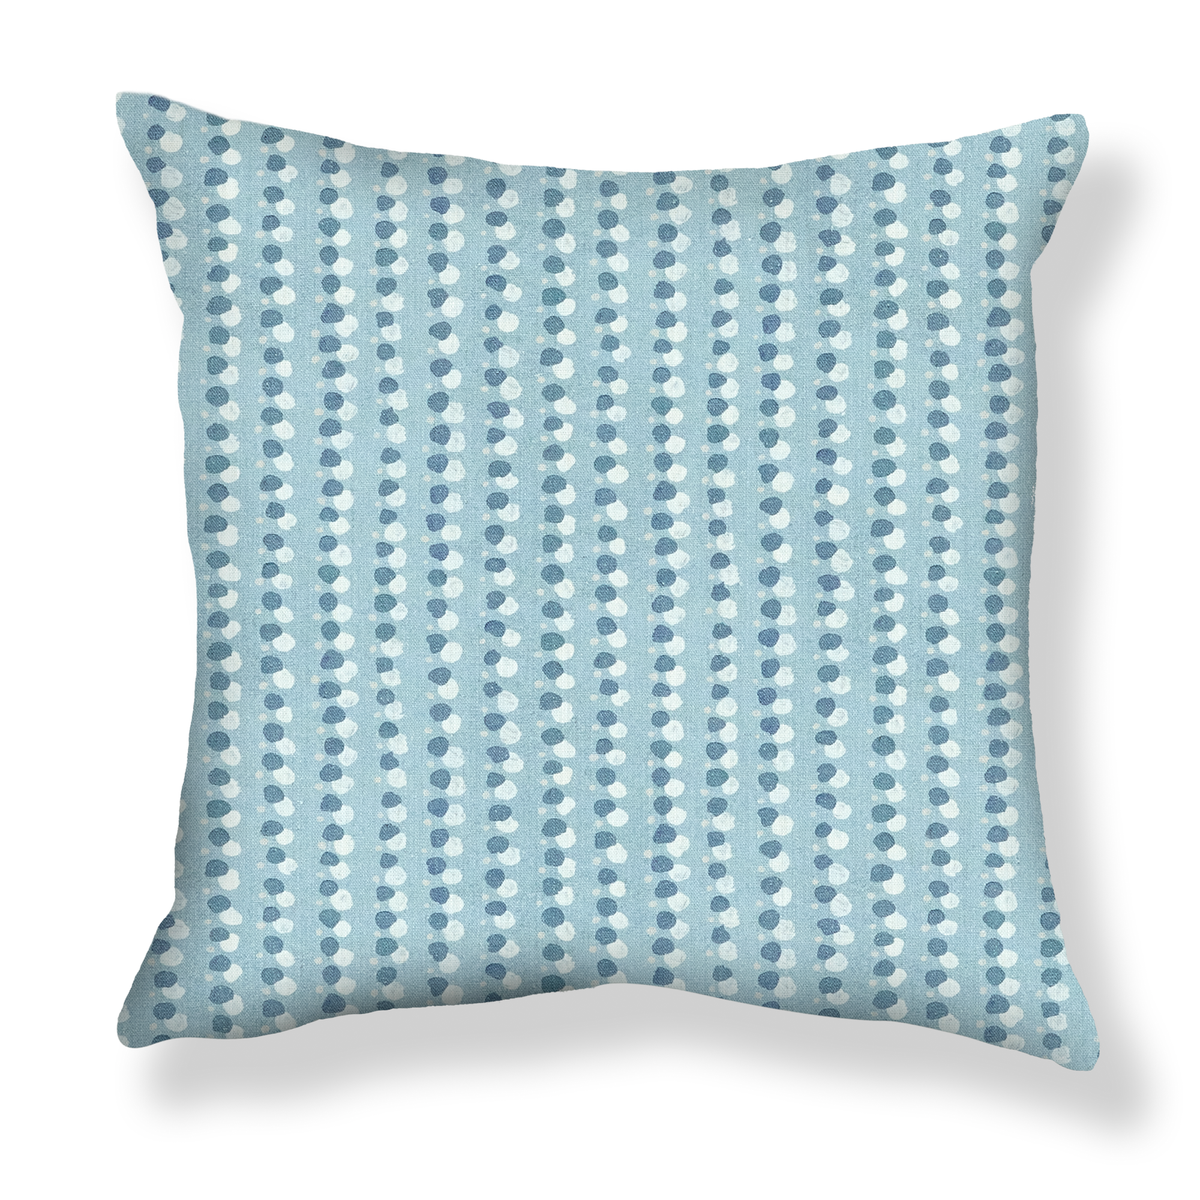 Dotted Lines Pillow in Light Blues